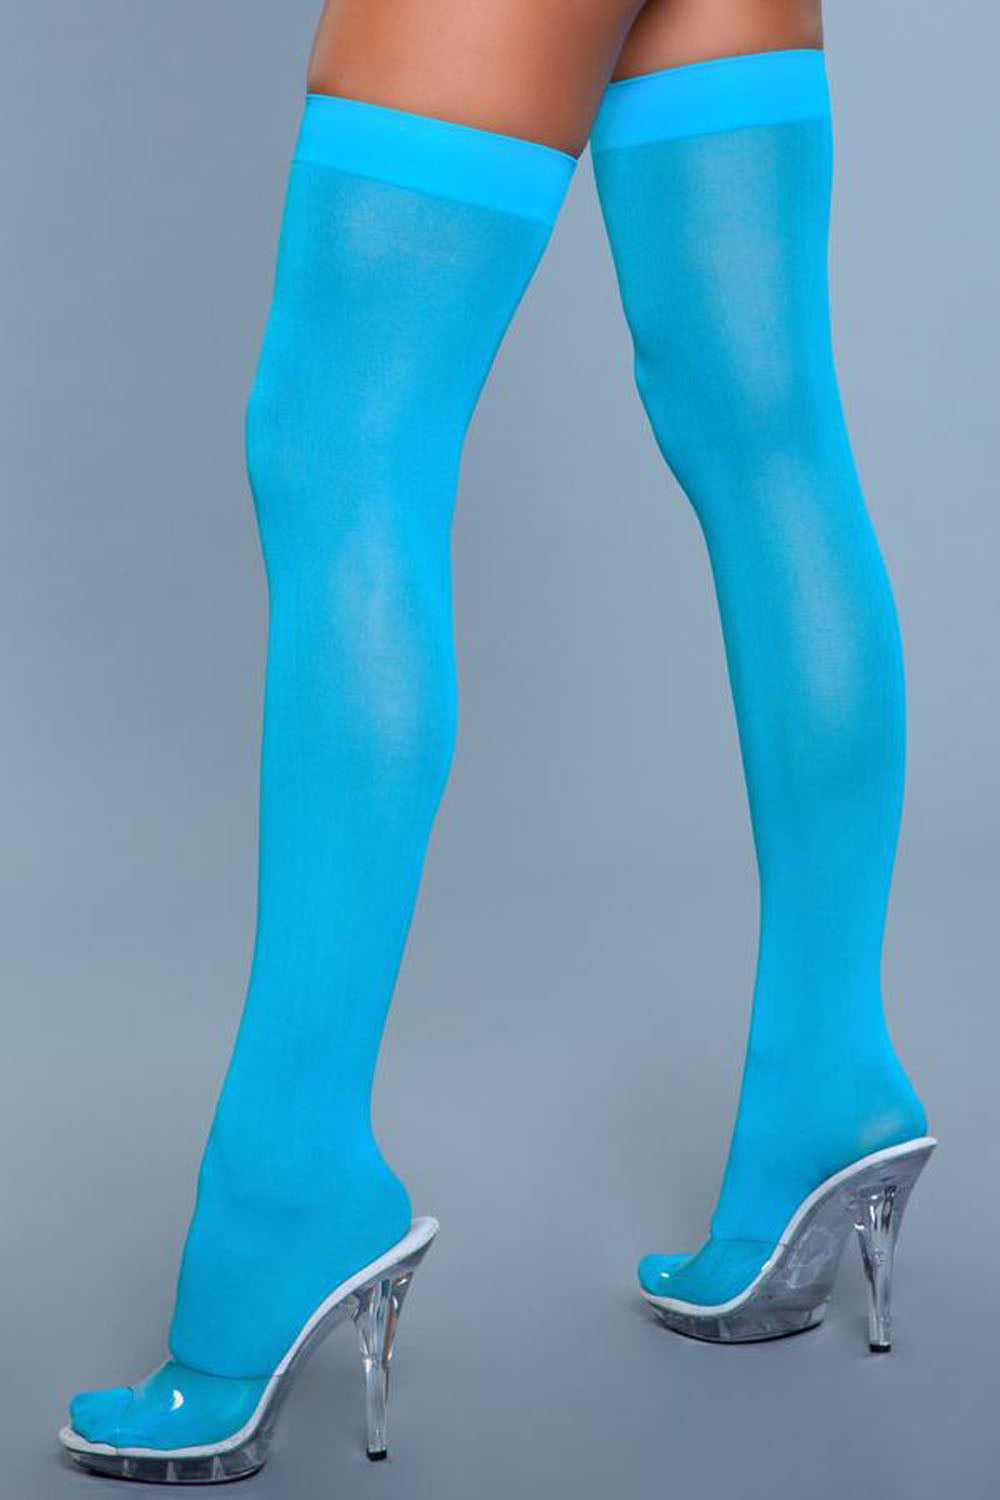 Opaque Nylon Thigh Highs - Turquoise - One Size BW-1932TUR